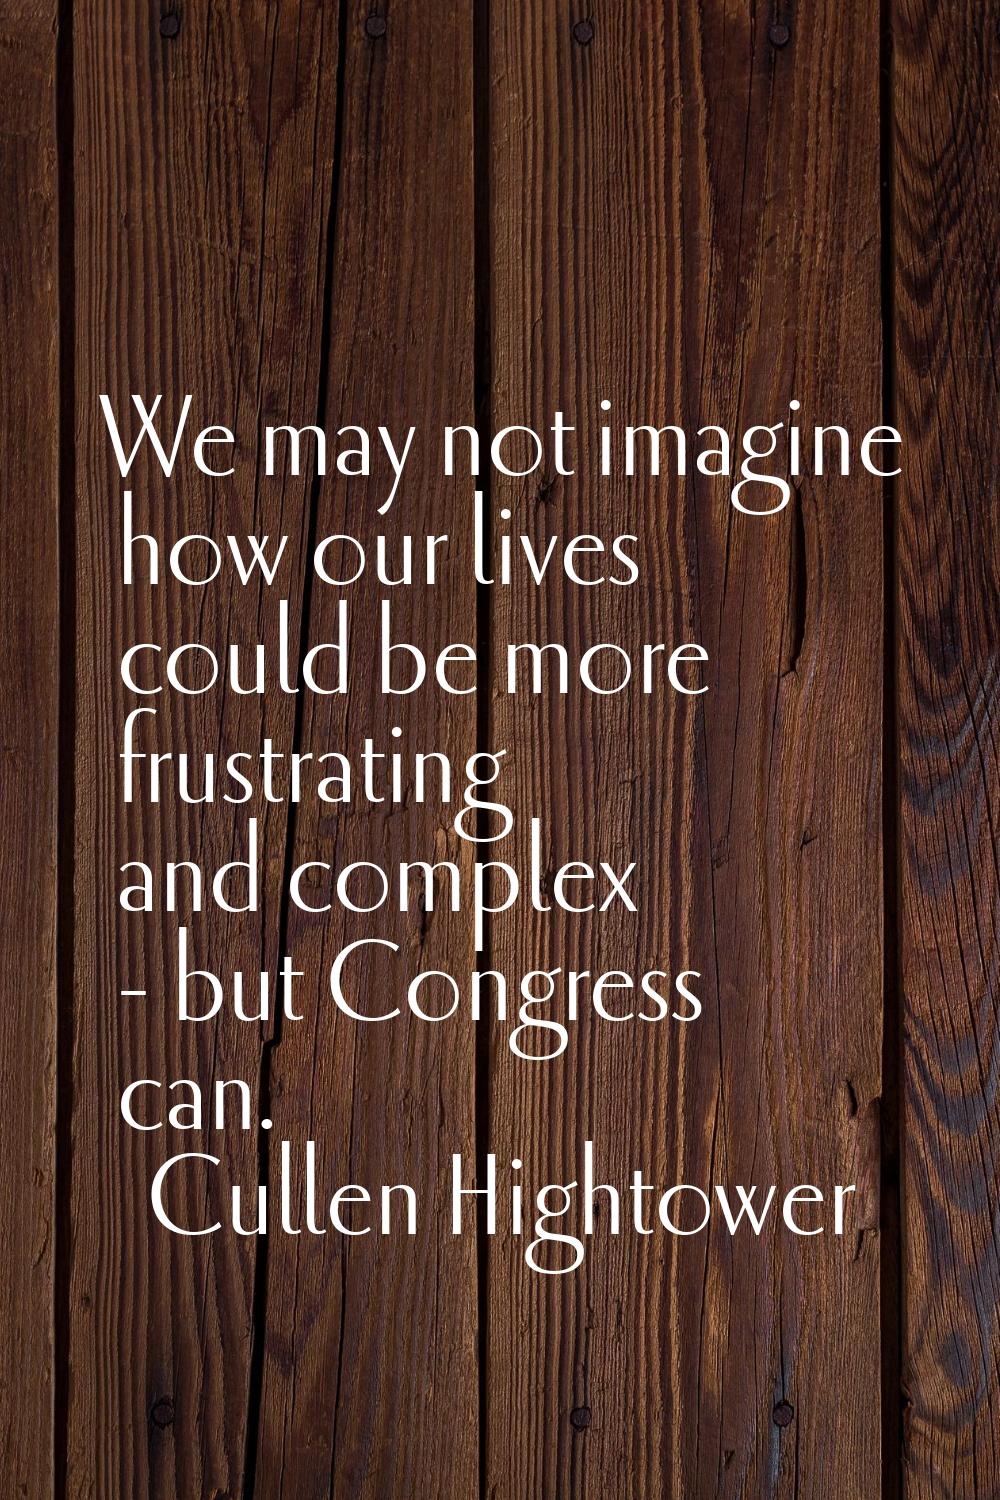 We may not imagine how our lives could be more frustrating and complex - but Congress can.